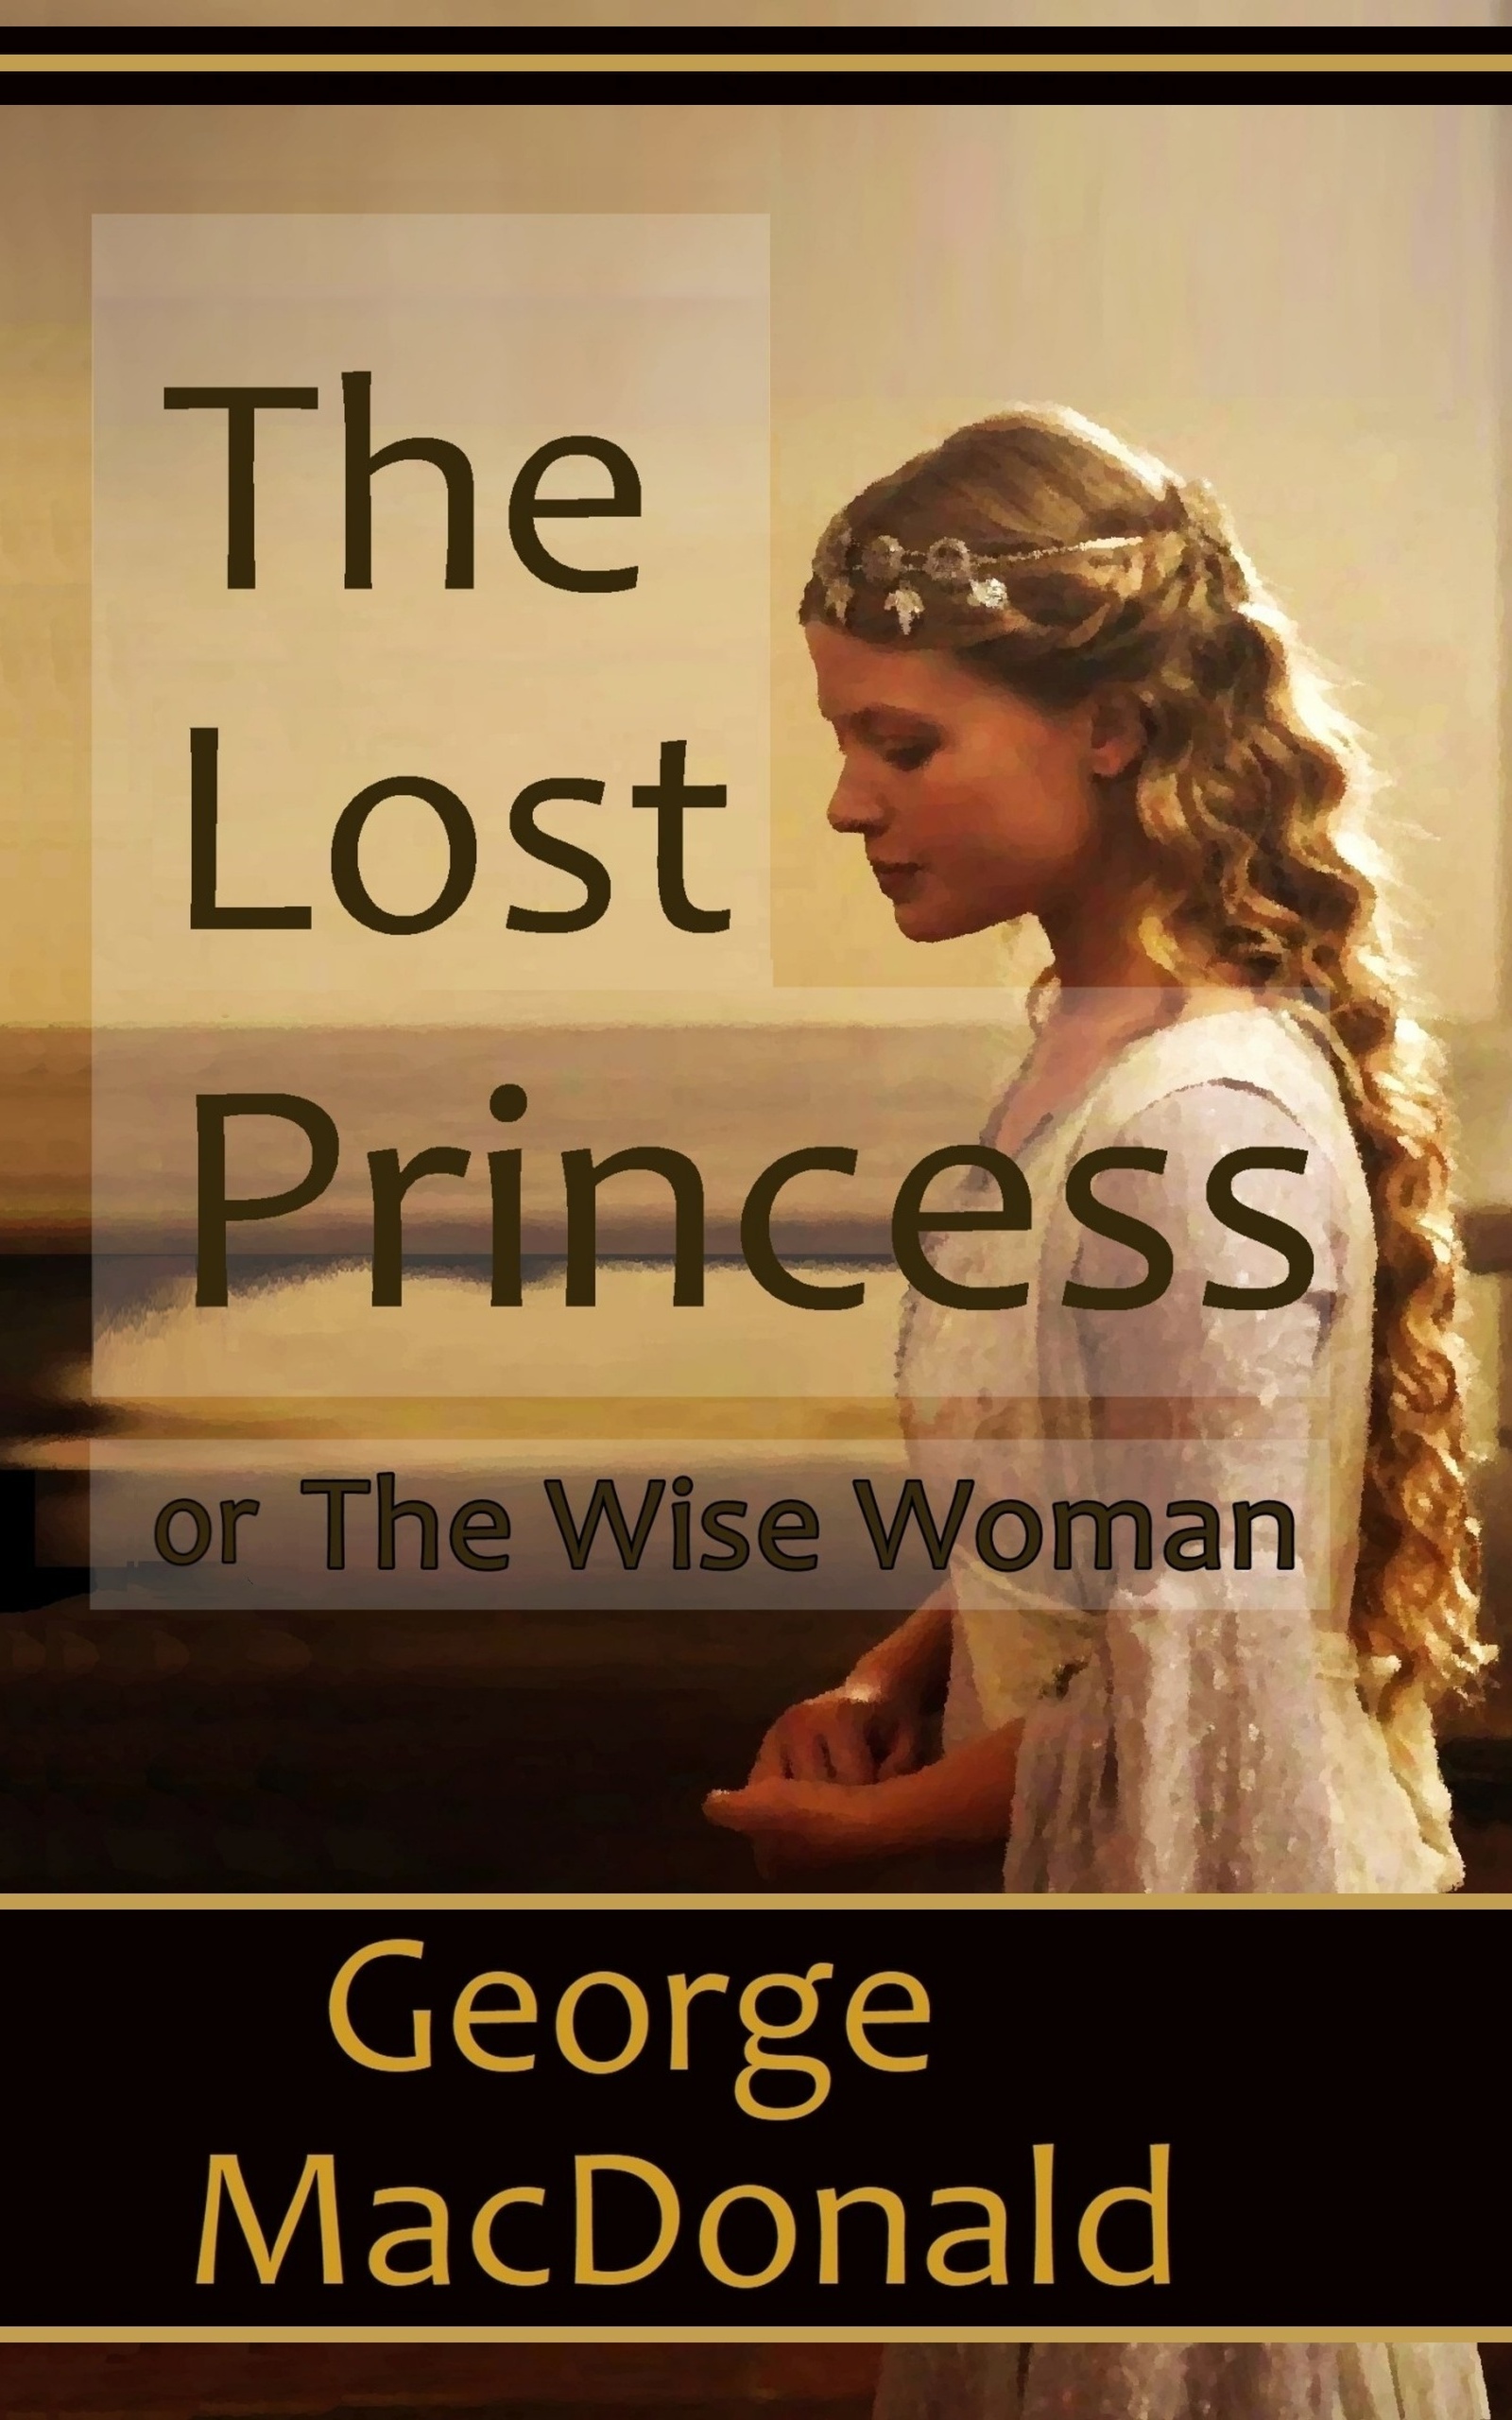 Book cover image for The Lost Princess (or The Wise Woman), by George MacDonald